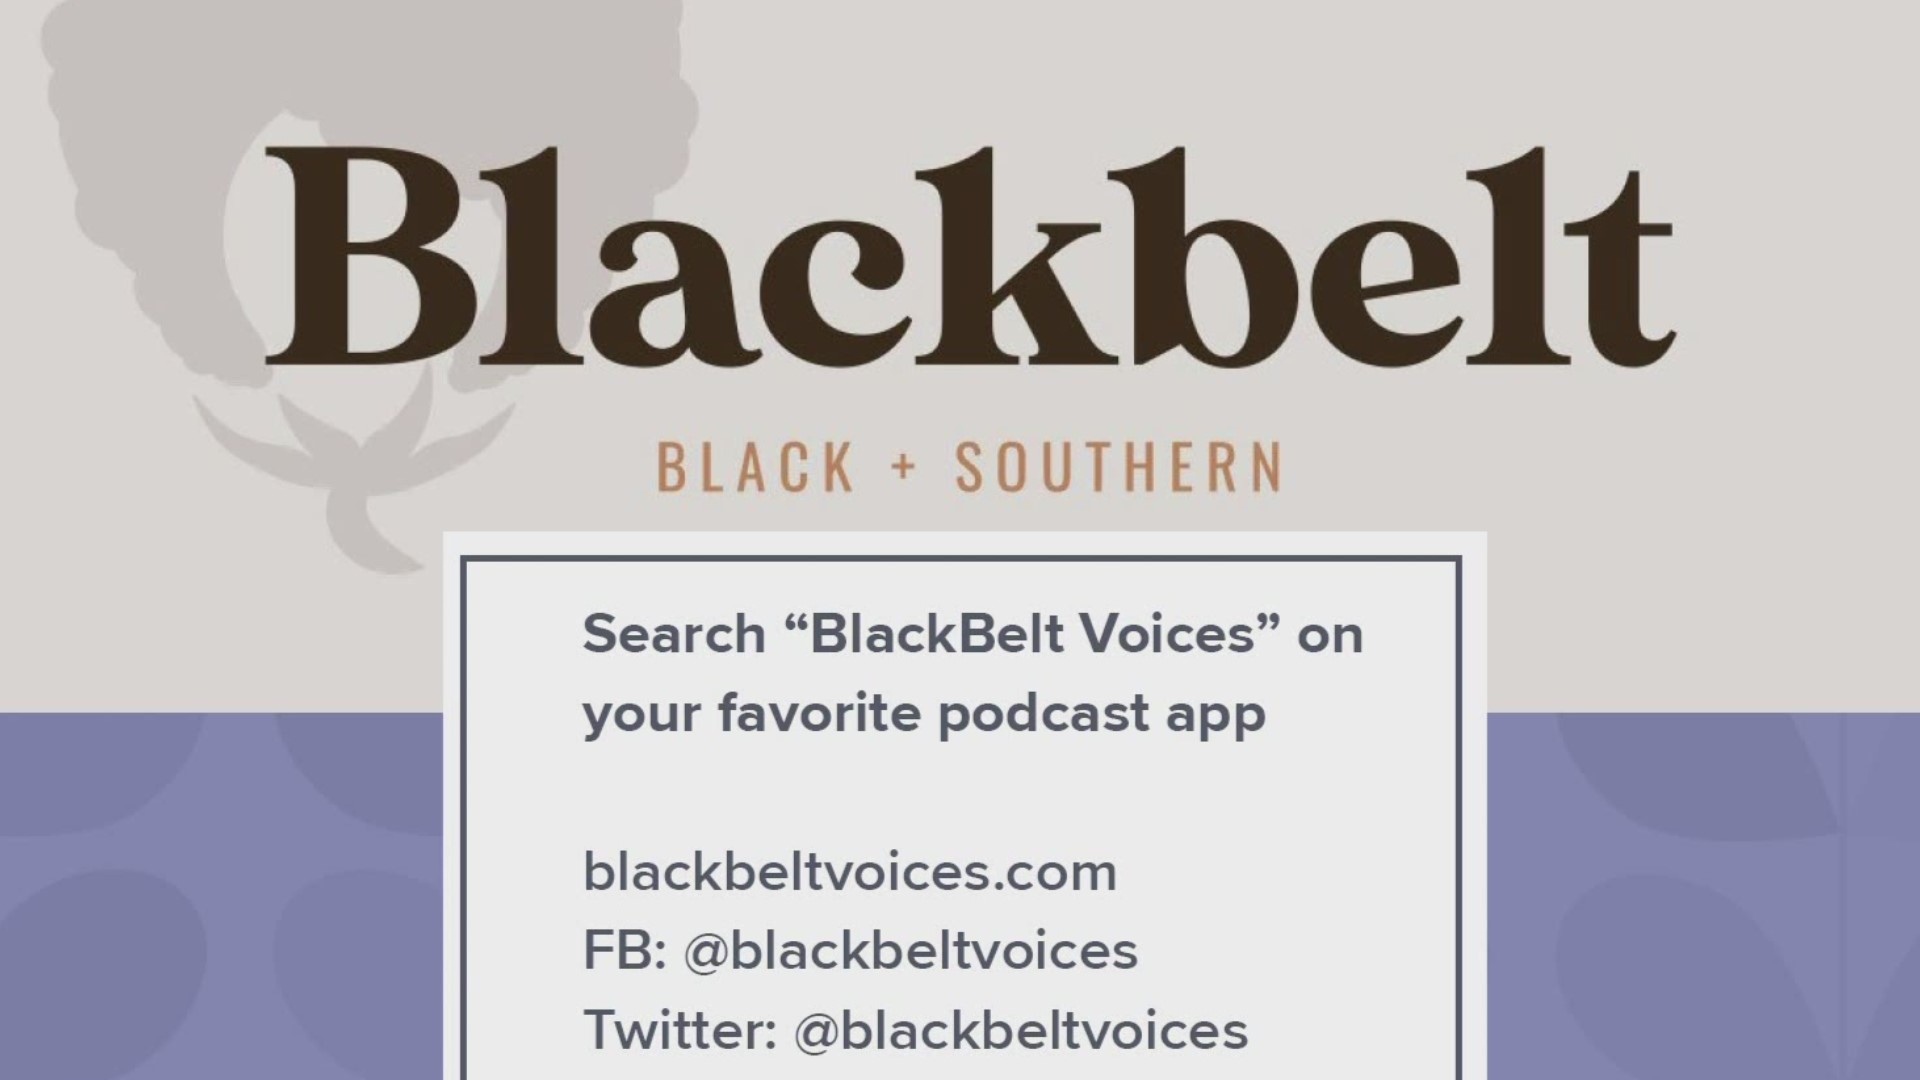 BlackBelt Voices is a podcast hosted by Arkansans Adena White and Kara Wilkins and edited together by Katrina Dupins.